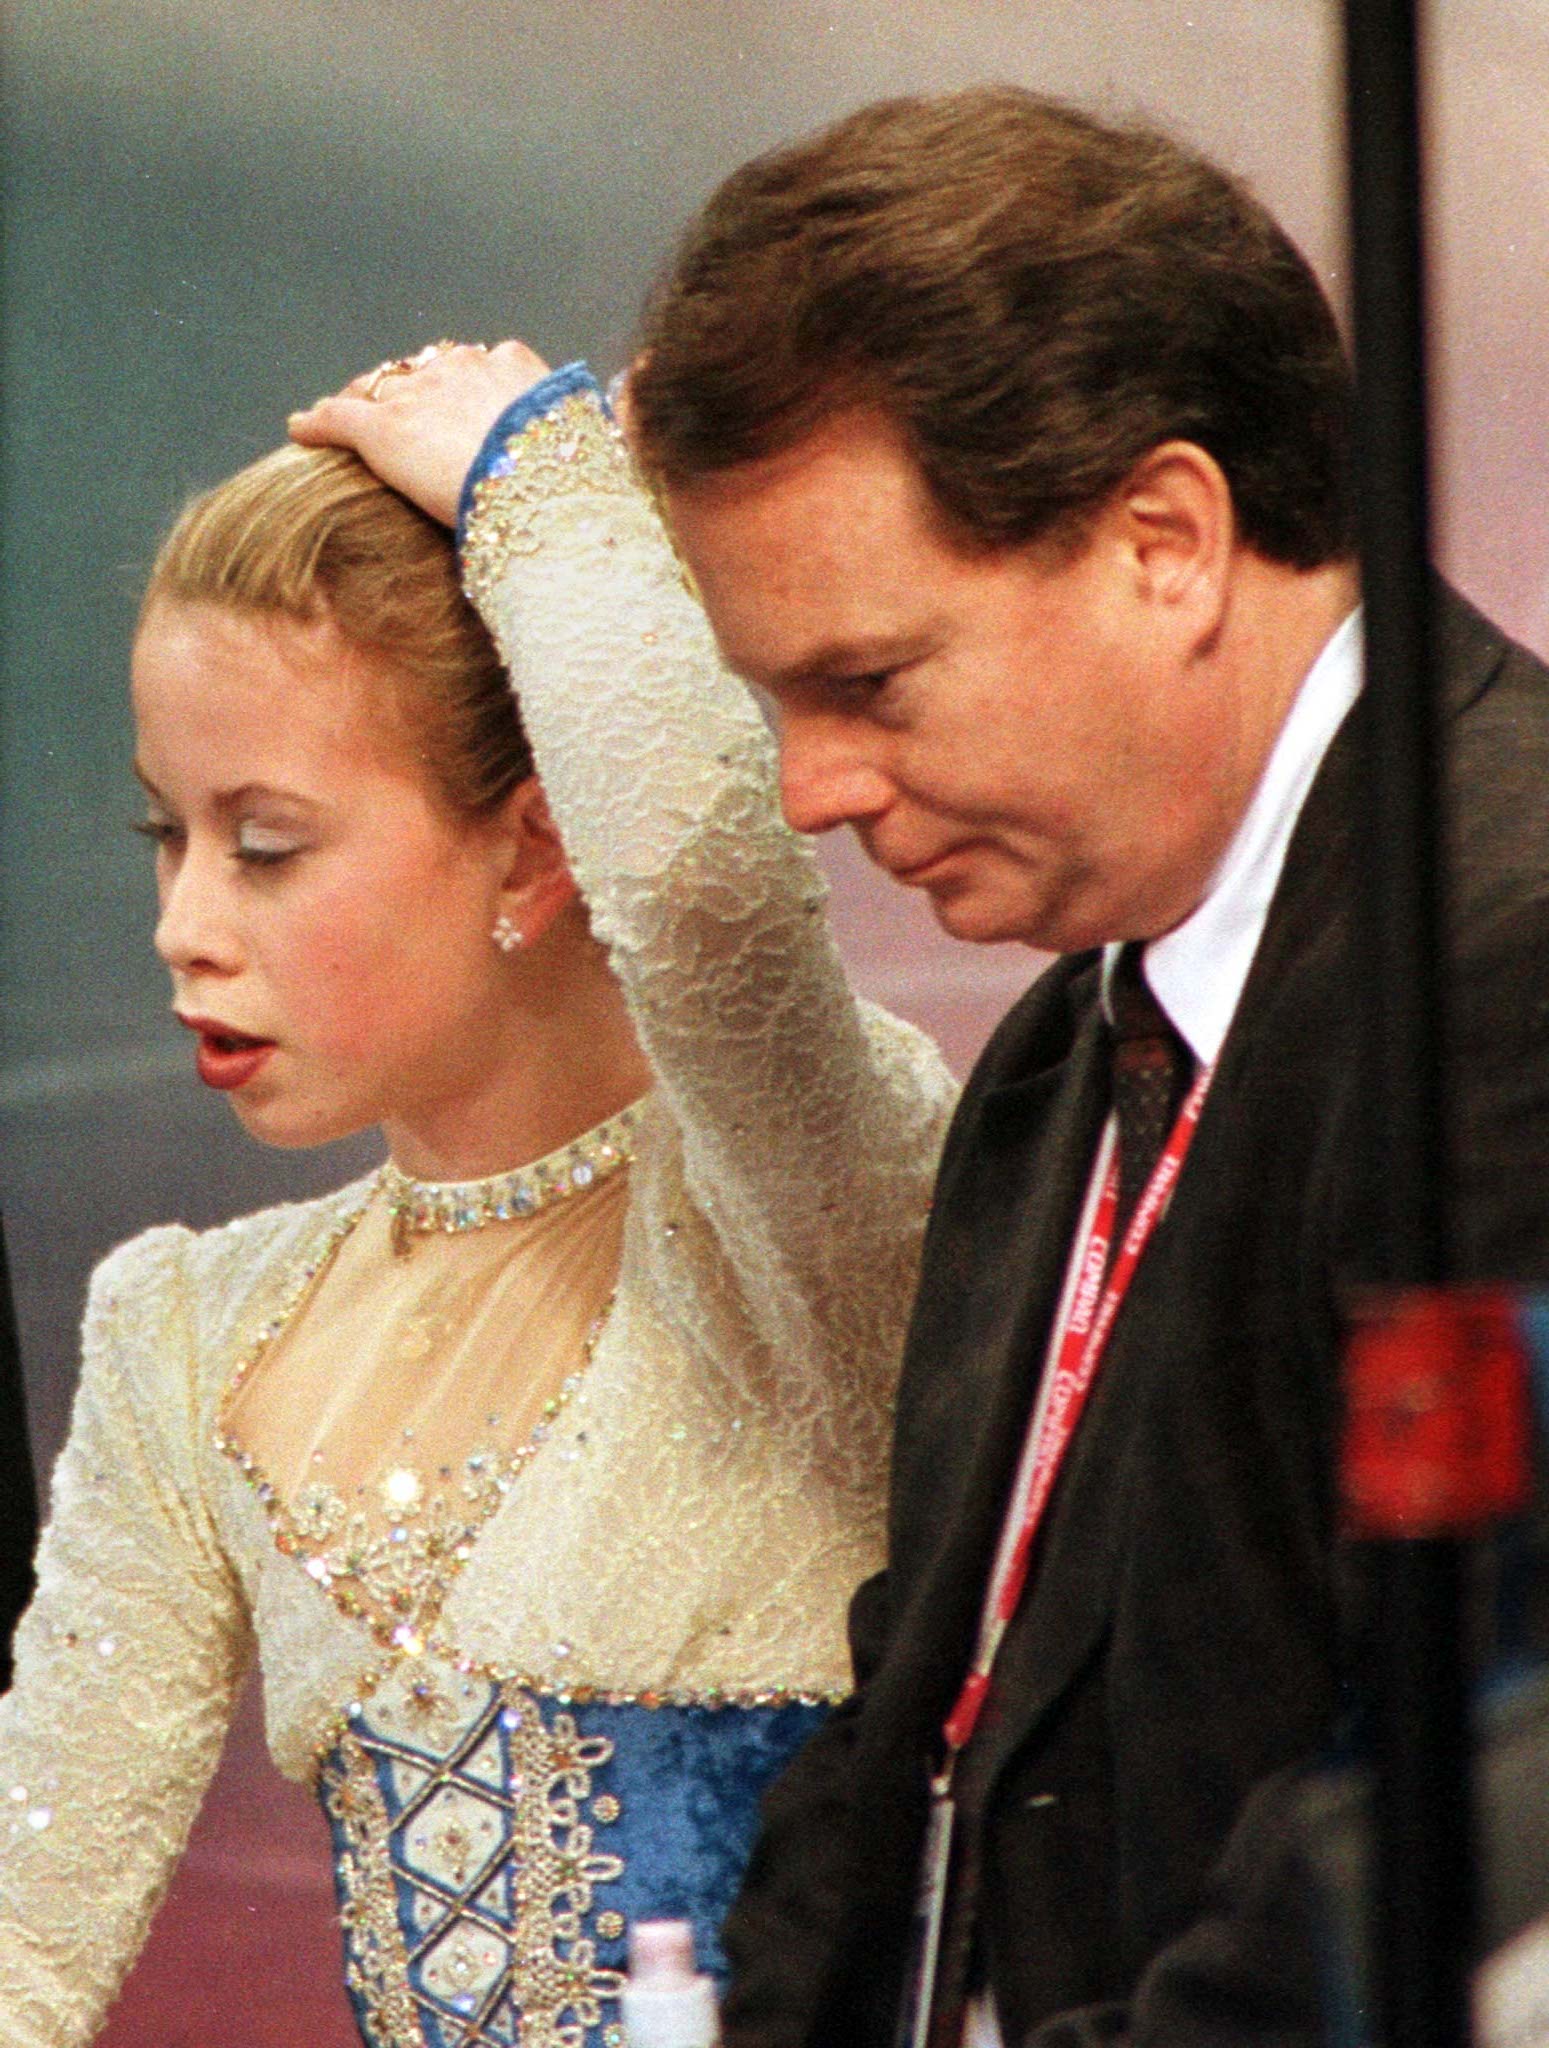 PHOTO: Coach Richard Callahan stands next to defending world and U.S. champion Tara Lipinski as judges reveal their scores following her short program routine at the U.S. National Figure Skating Championships in Philadelphia, Jan. 8, 1998.